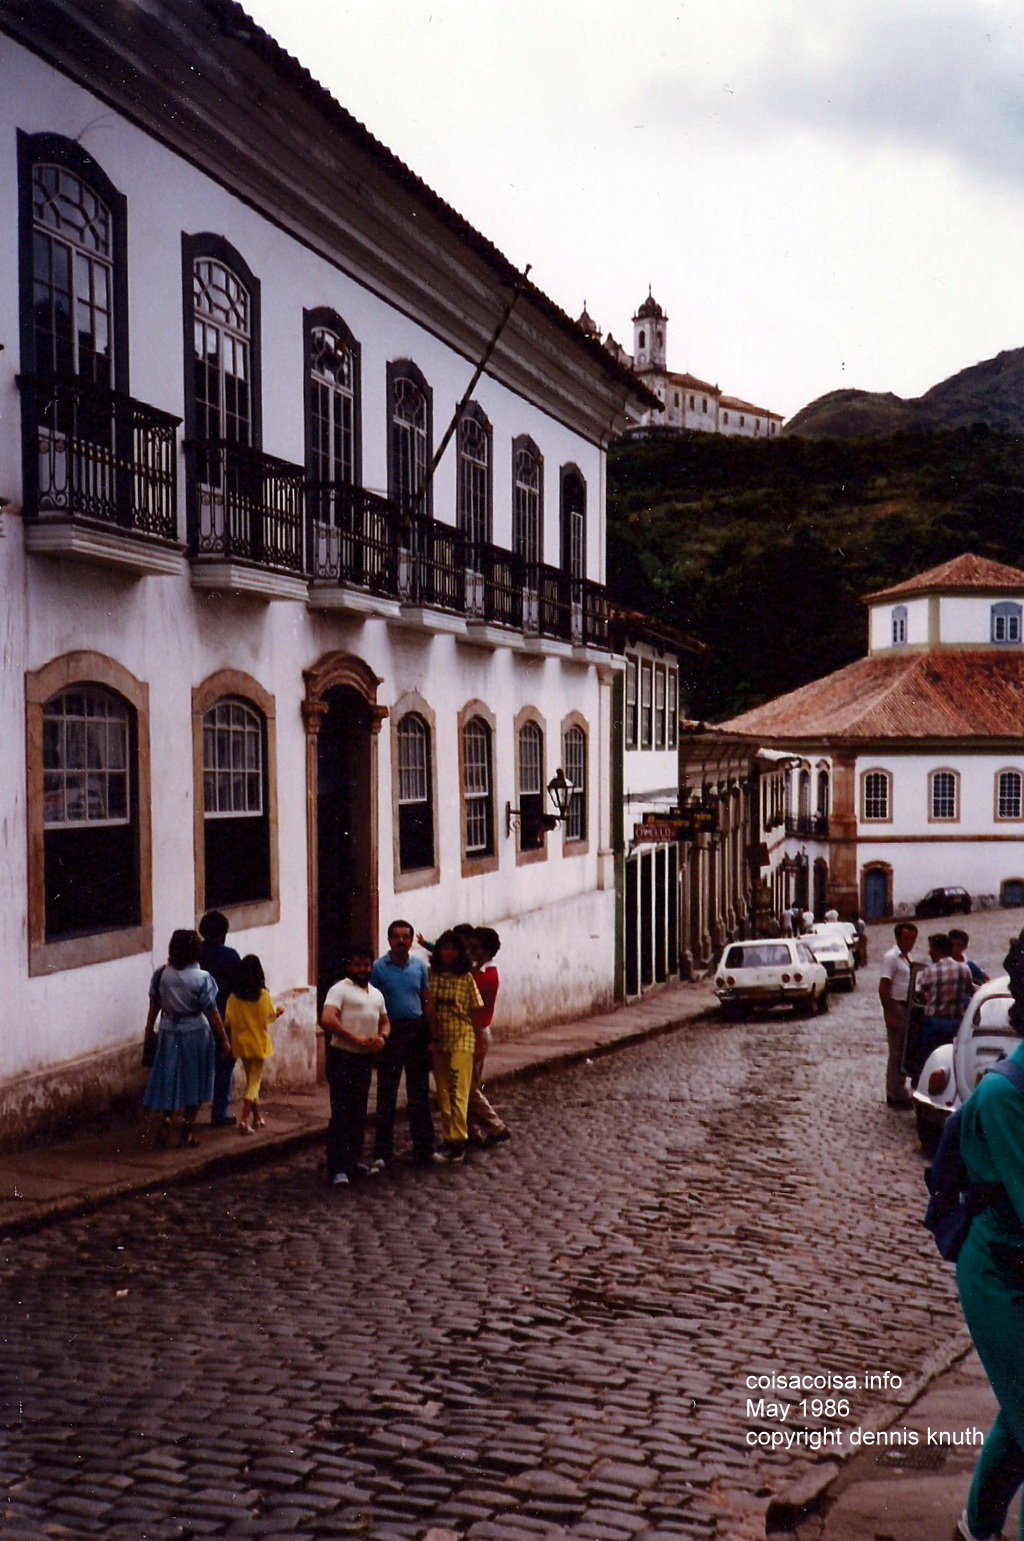 The 19th Century buildings of Ouro Preto with the Moreira Family